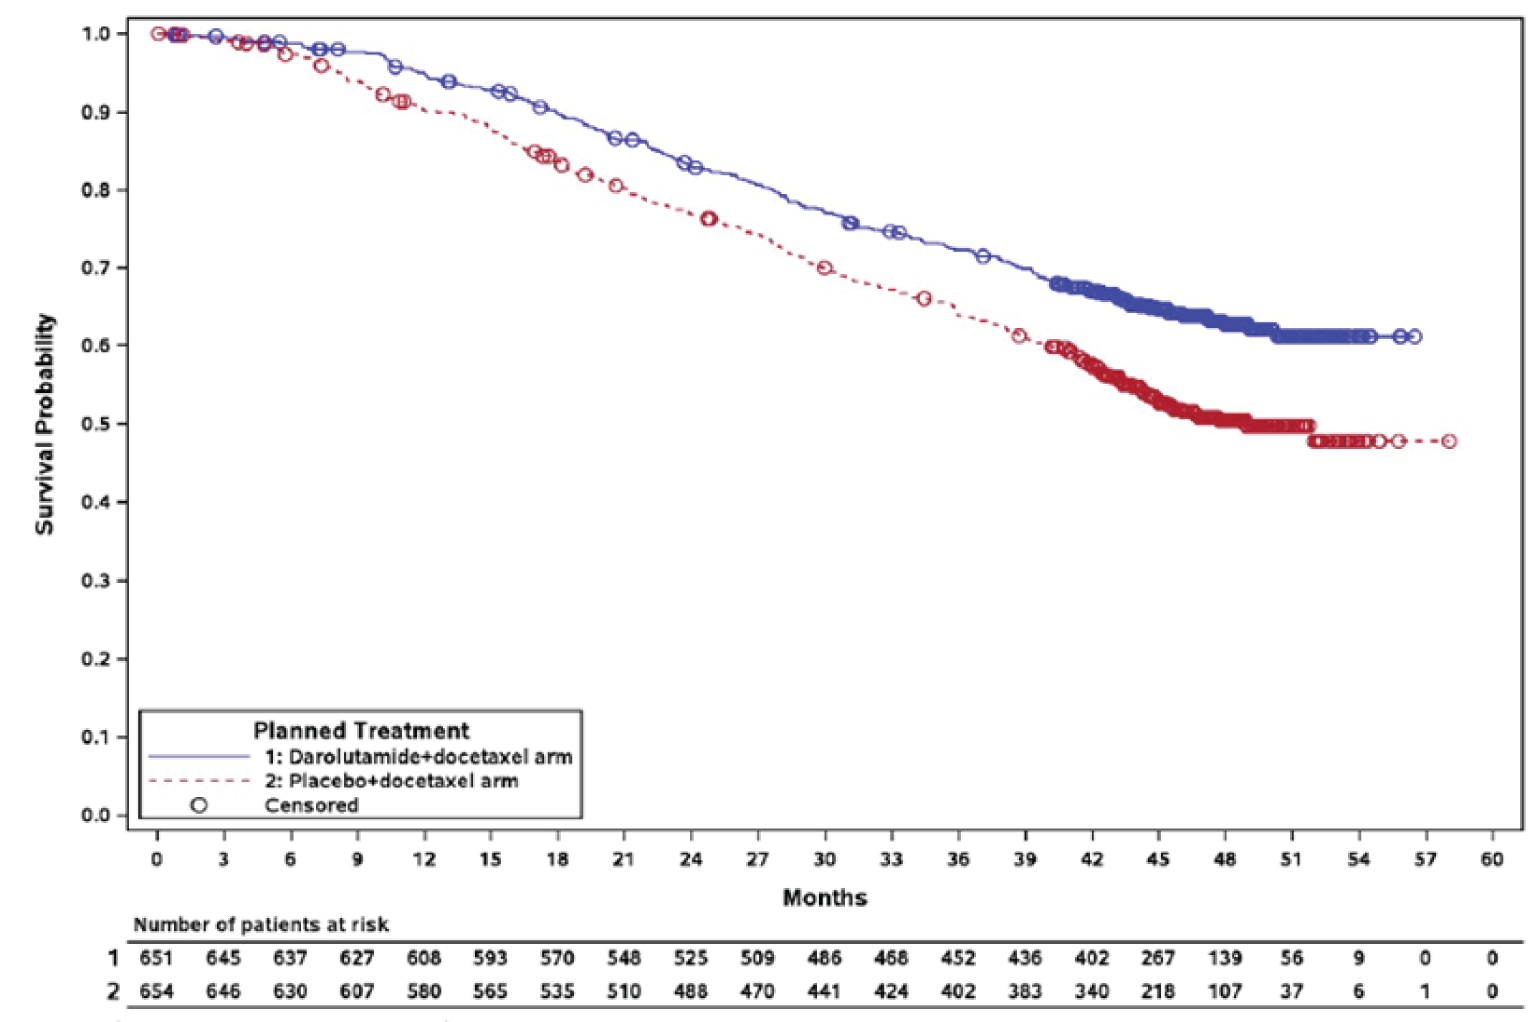 Kaplan-Meier curve of OS for the darolutamide plus docetaxel and ADT arm and the placebo plus docetaxel and ADT arm from 0 to 57 months of follow-up. The curves diverge at 6 months, with the darolutamide plus docetaxel and ADT arm having a higher survival probability compared to the placebo plus docetaxel and ADT arm. The curves remain separated until longest follow-up at 57 months.